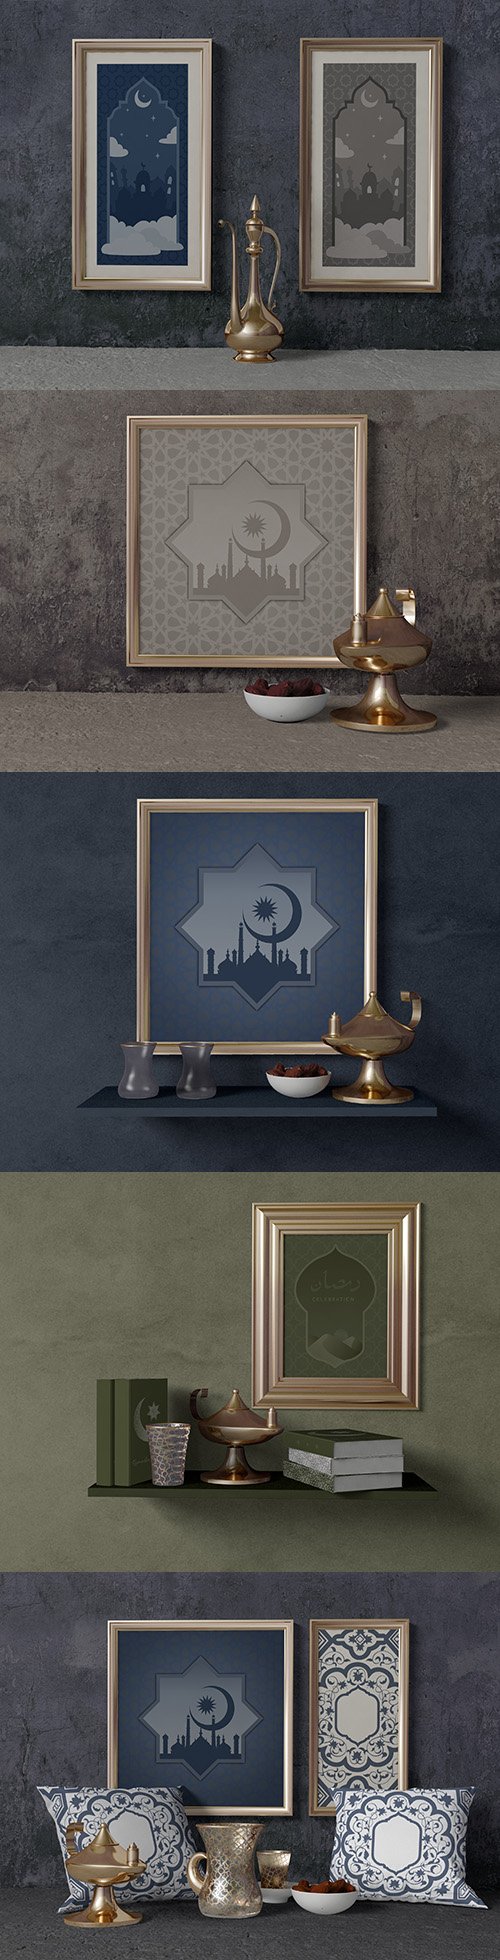 Ramadan composition with frame and cushions template 2